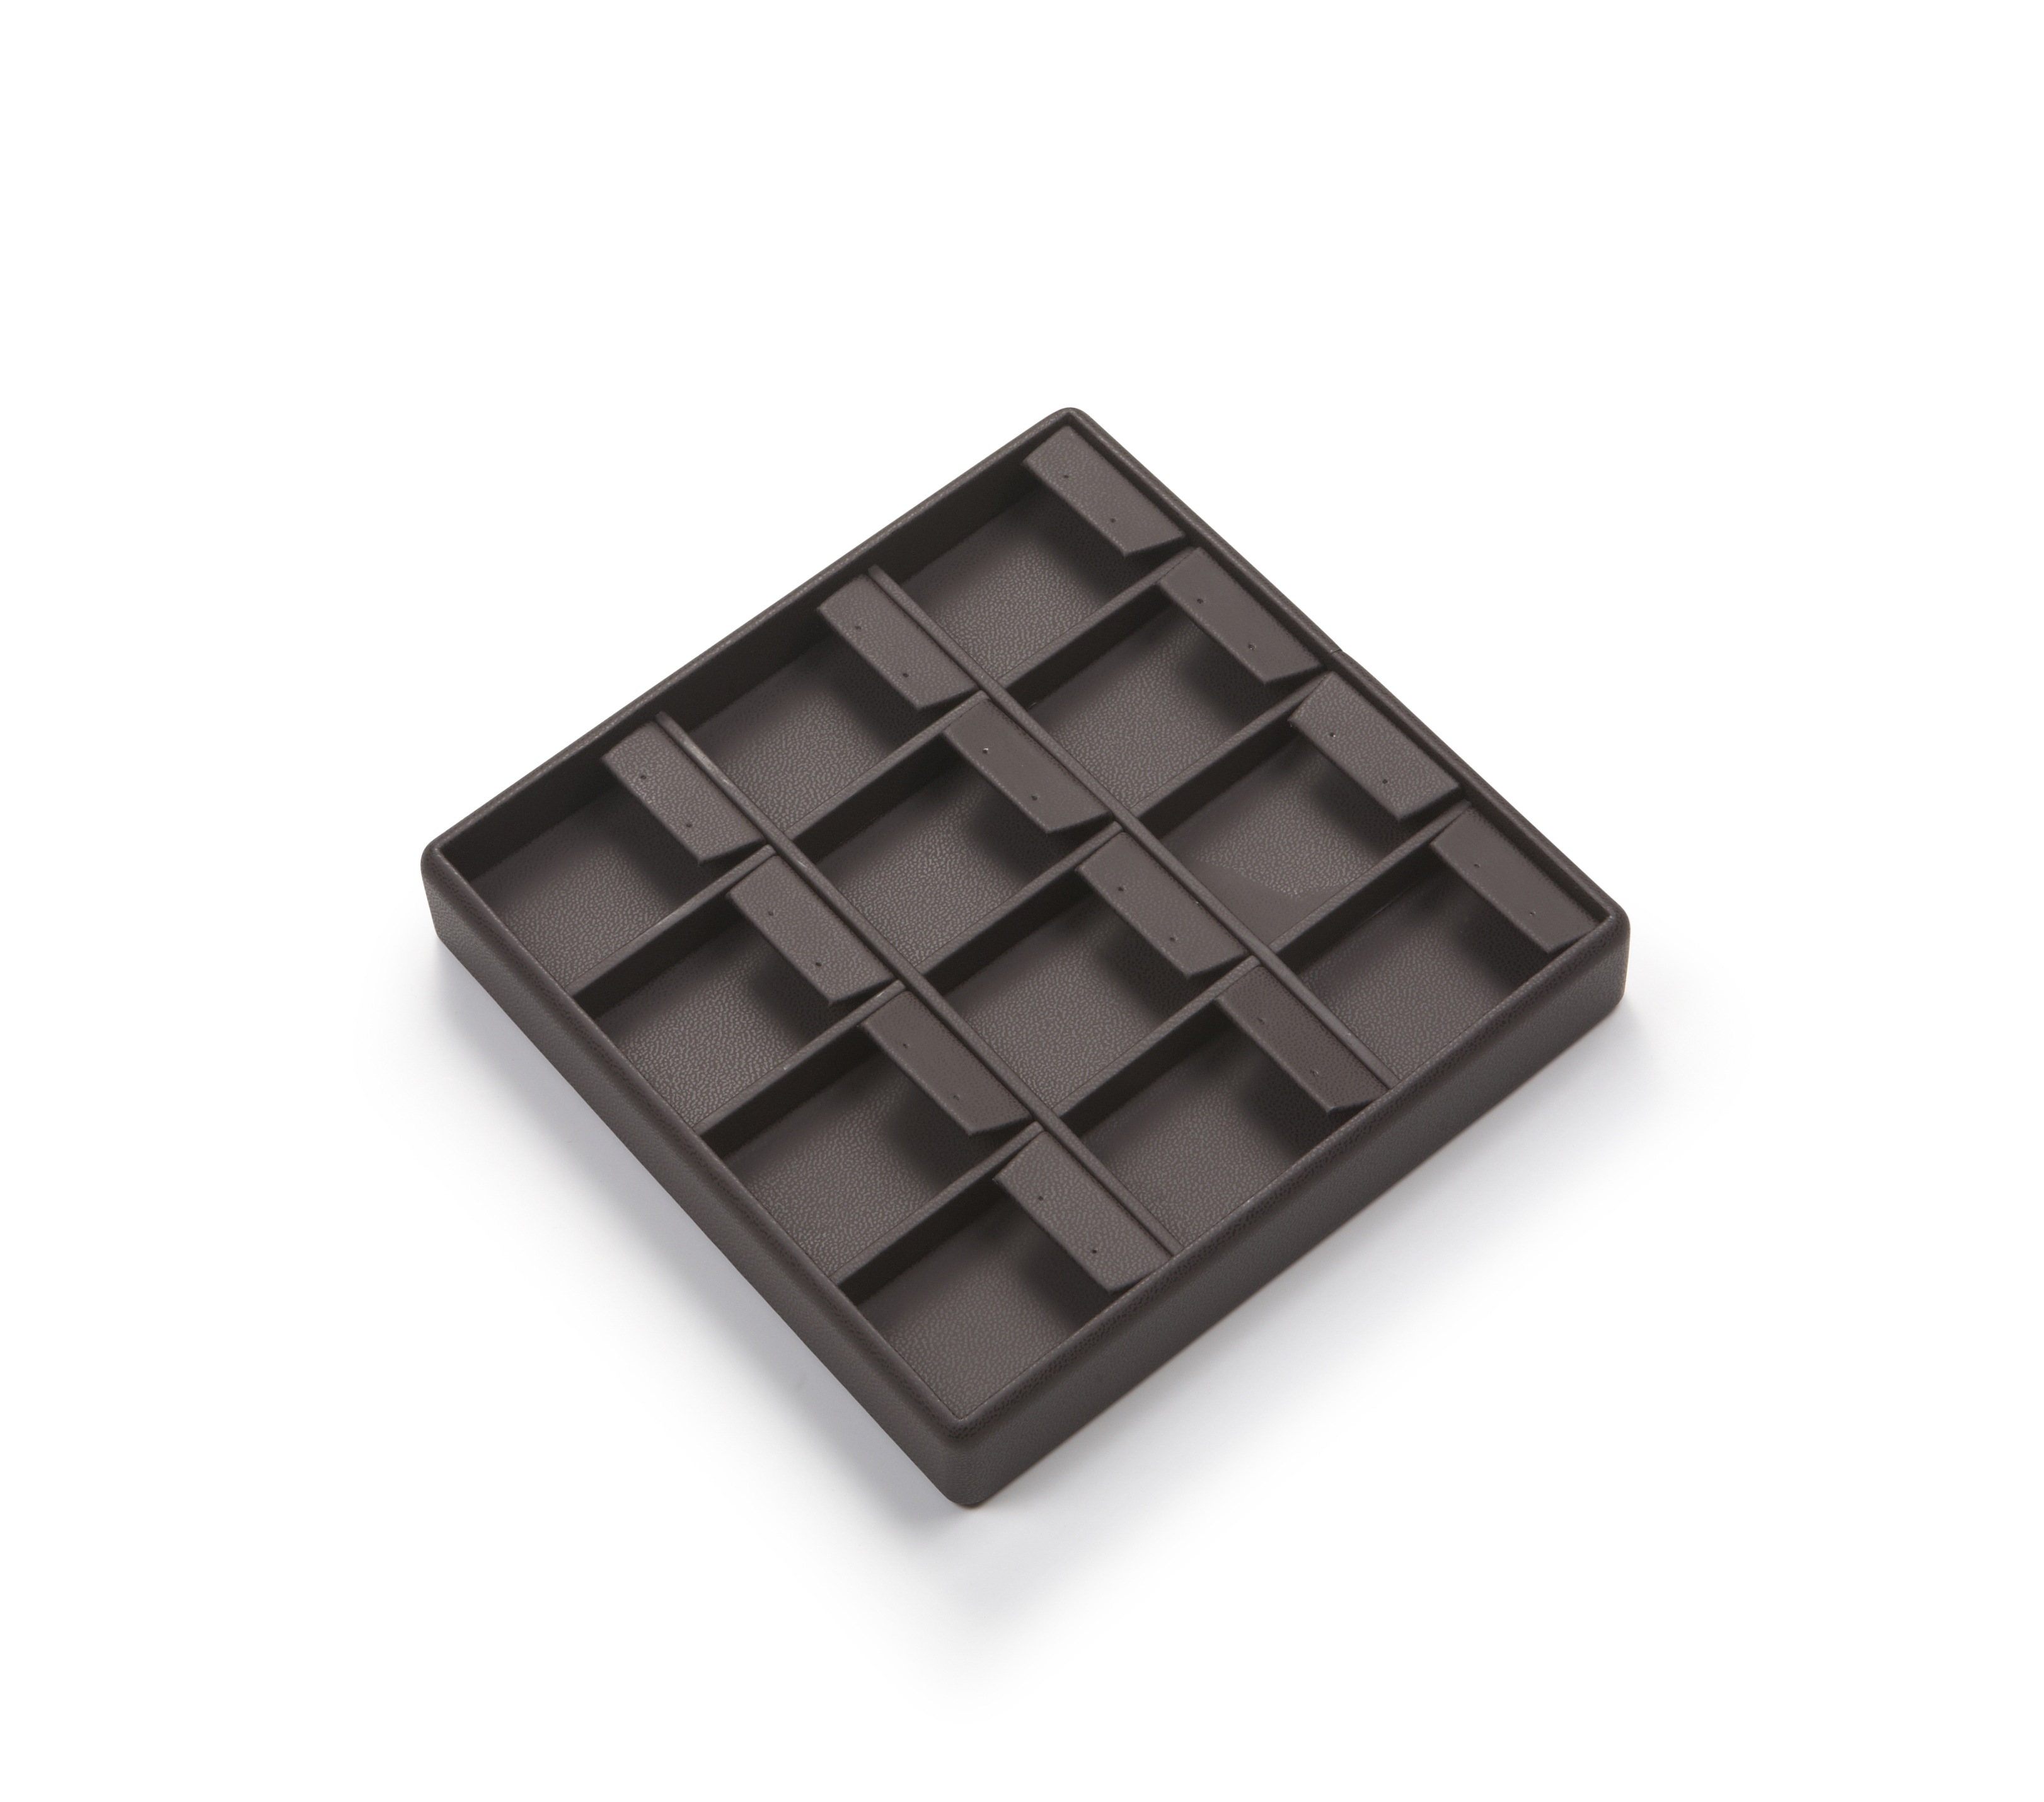 Chocolate Leatherette 12 Earring Tray